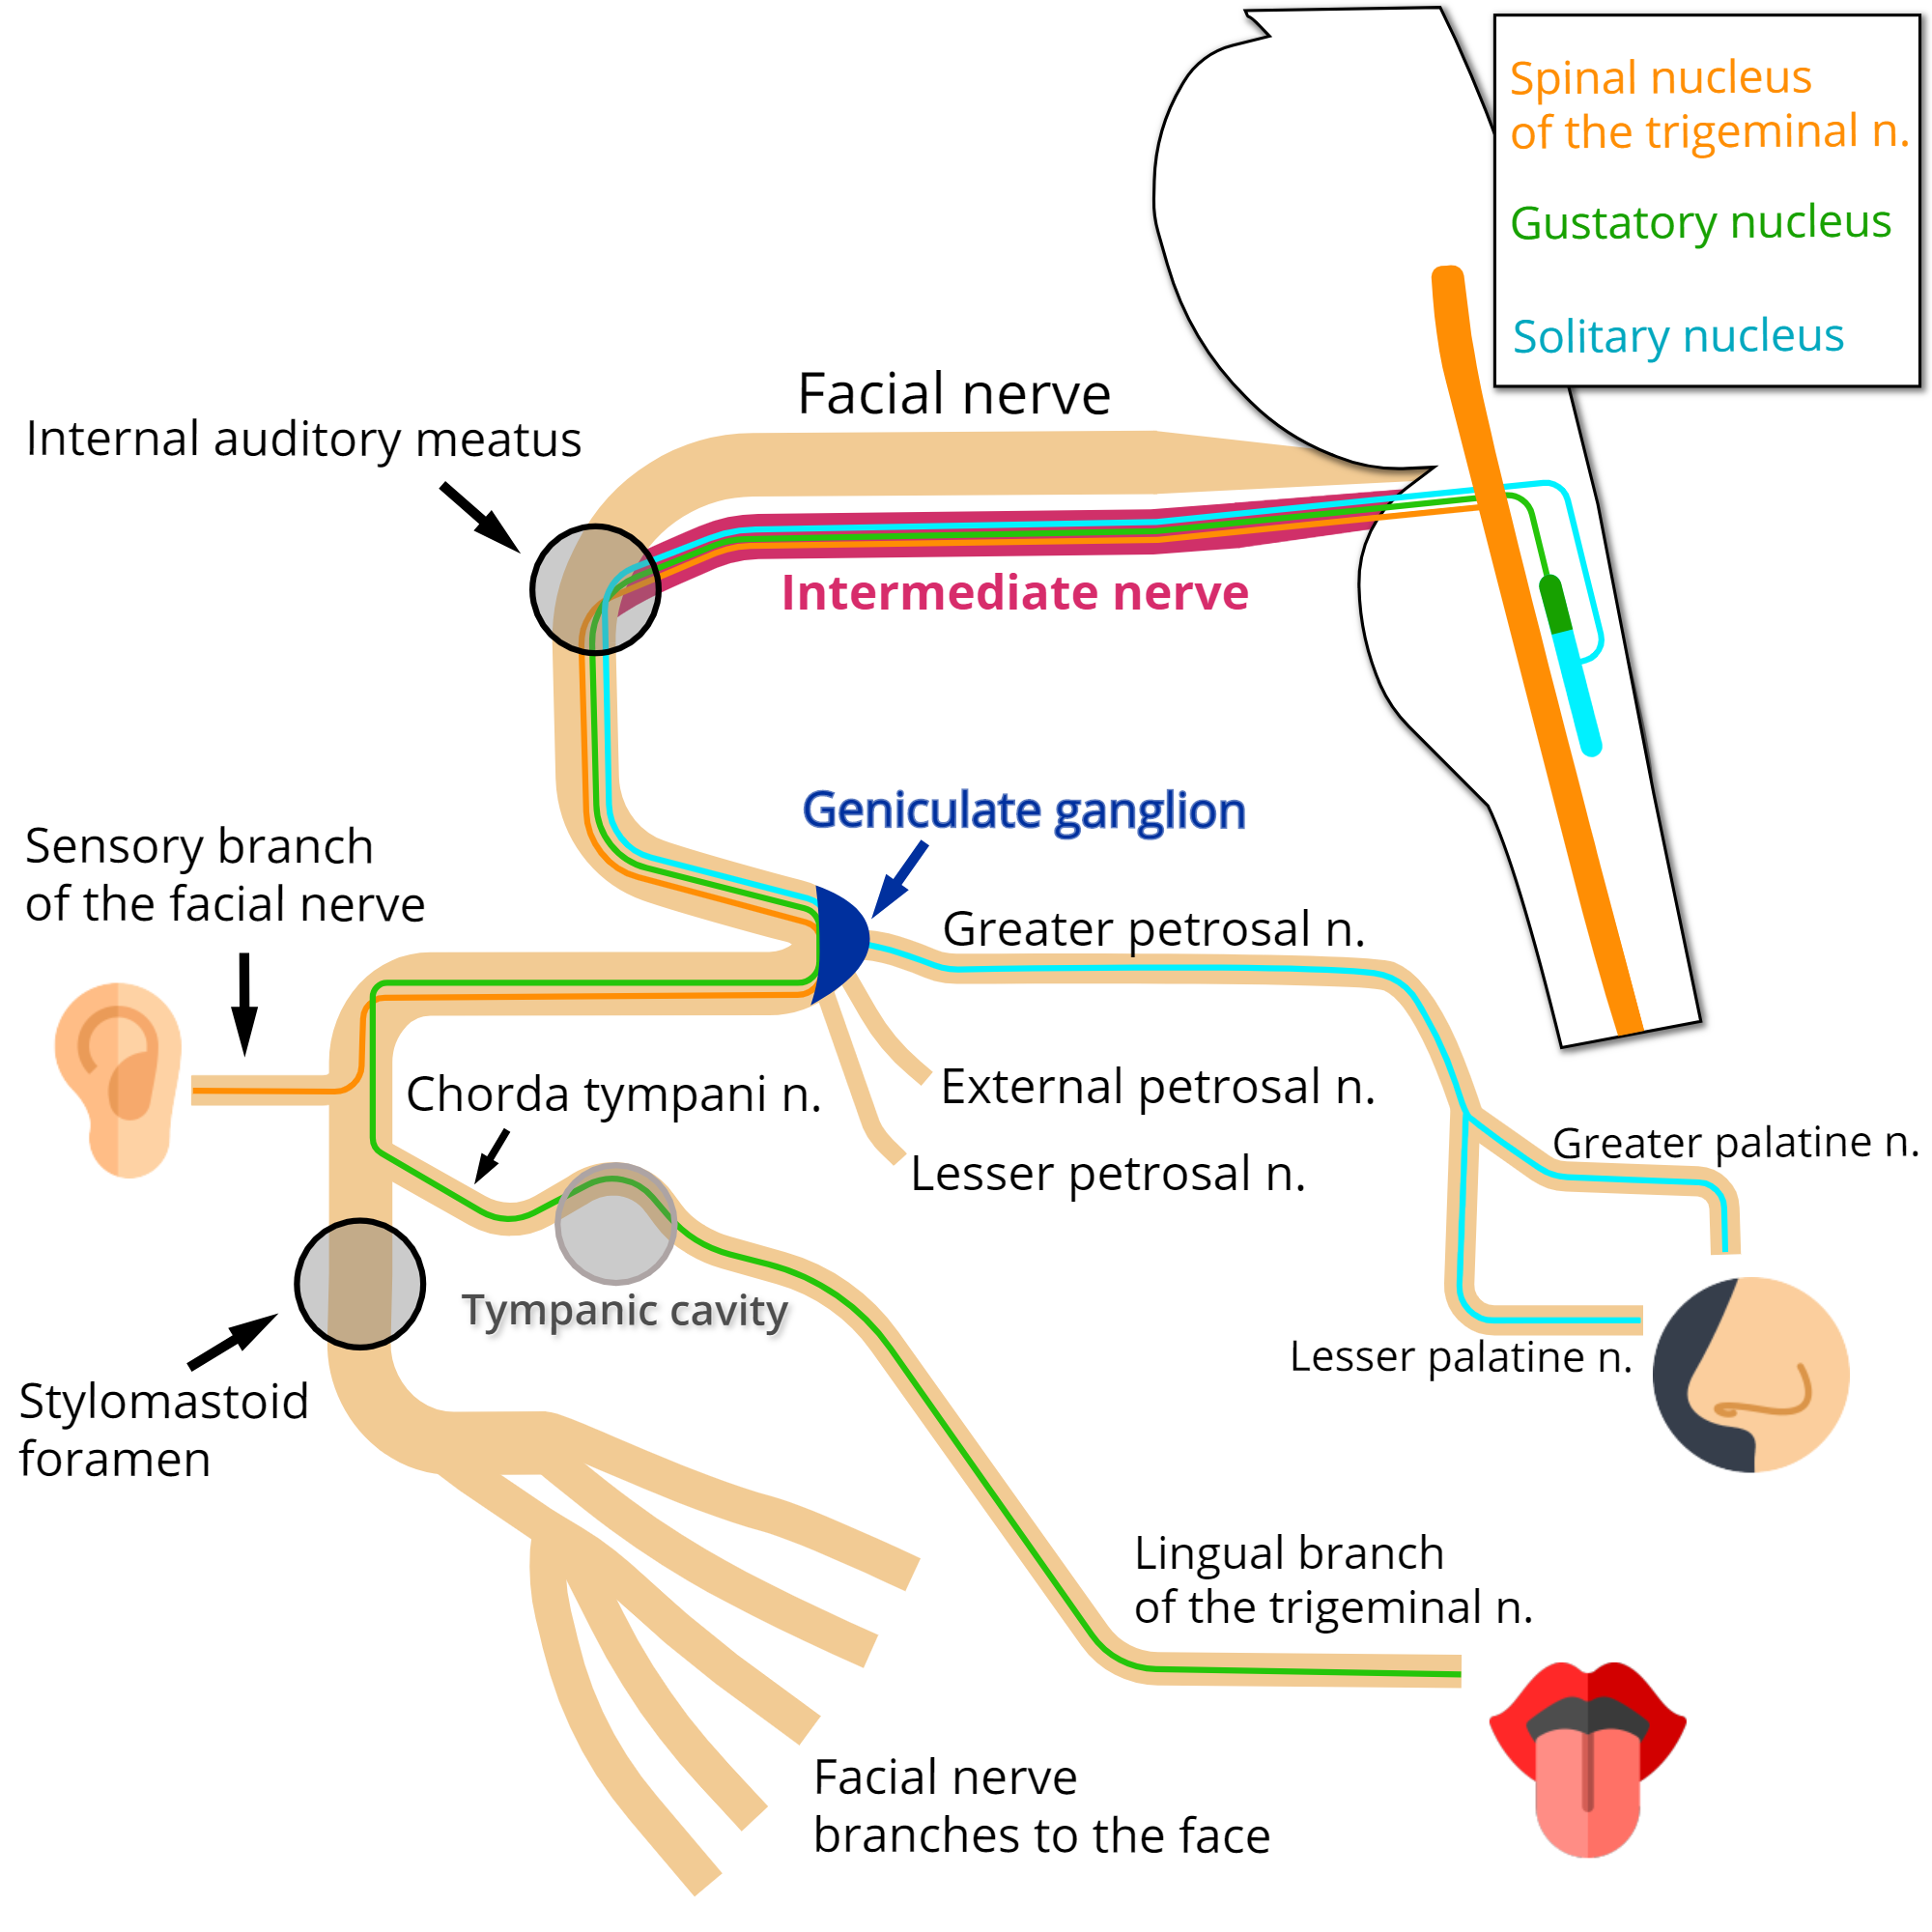 This diagram shows the different neuronal pathways associated with the geniculate ganglion